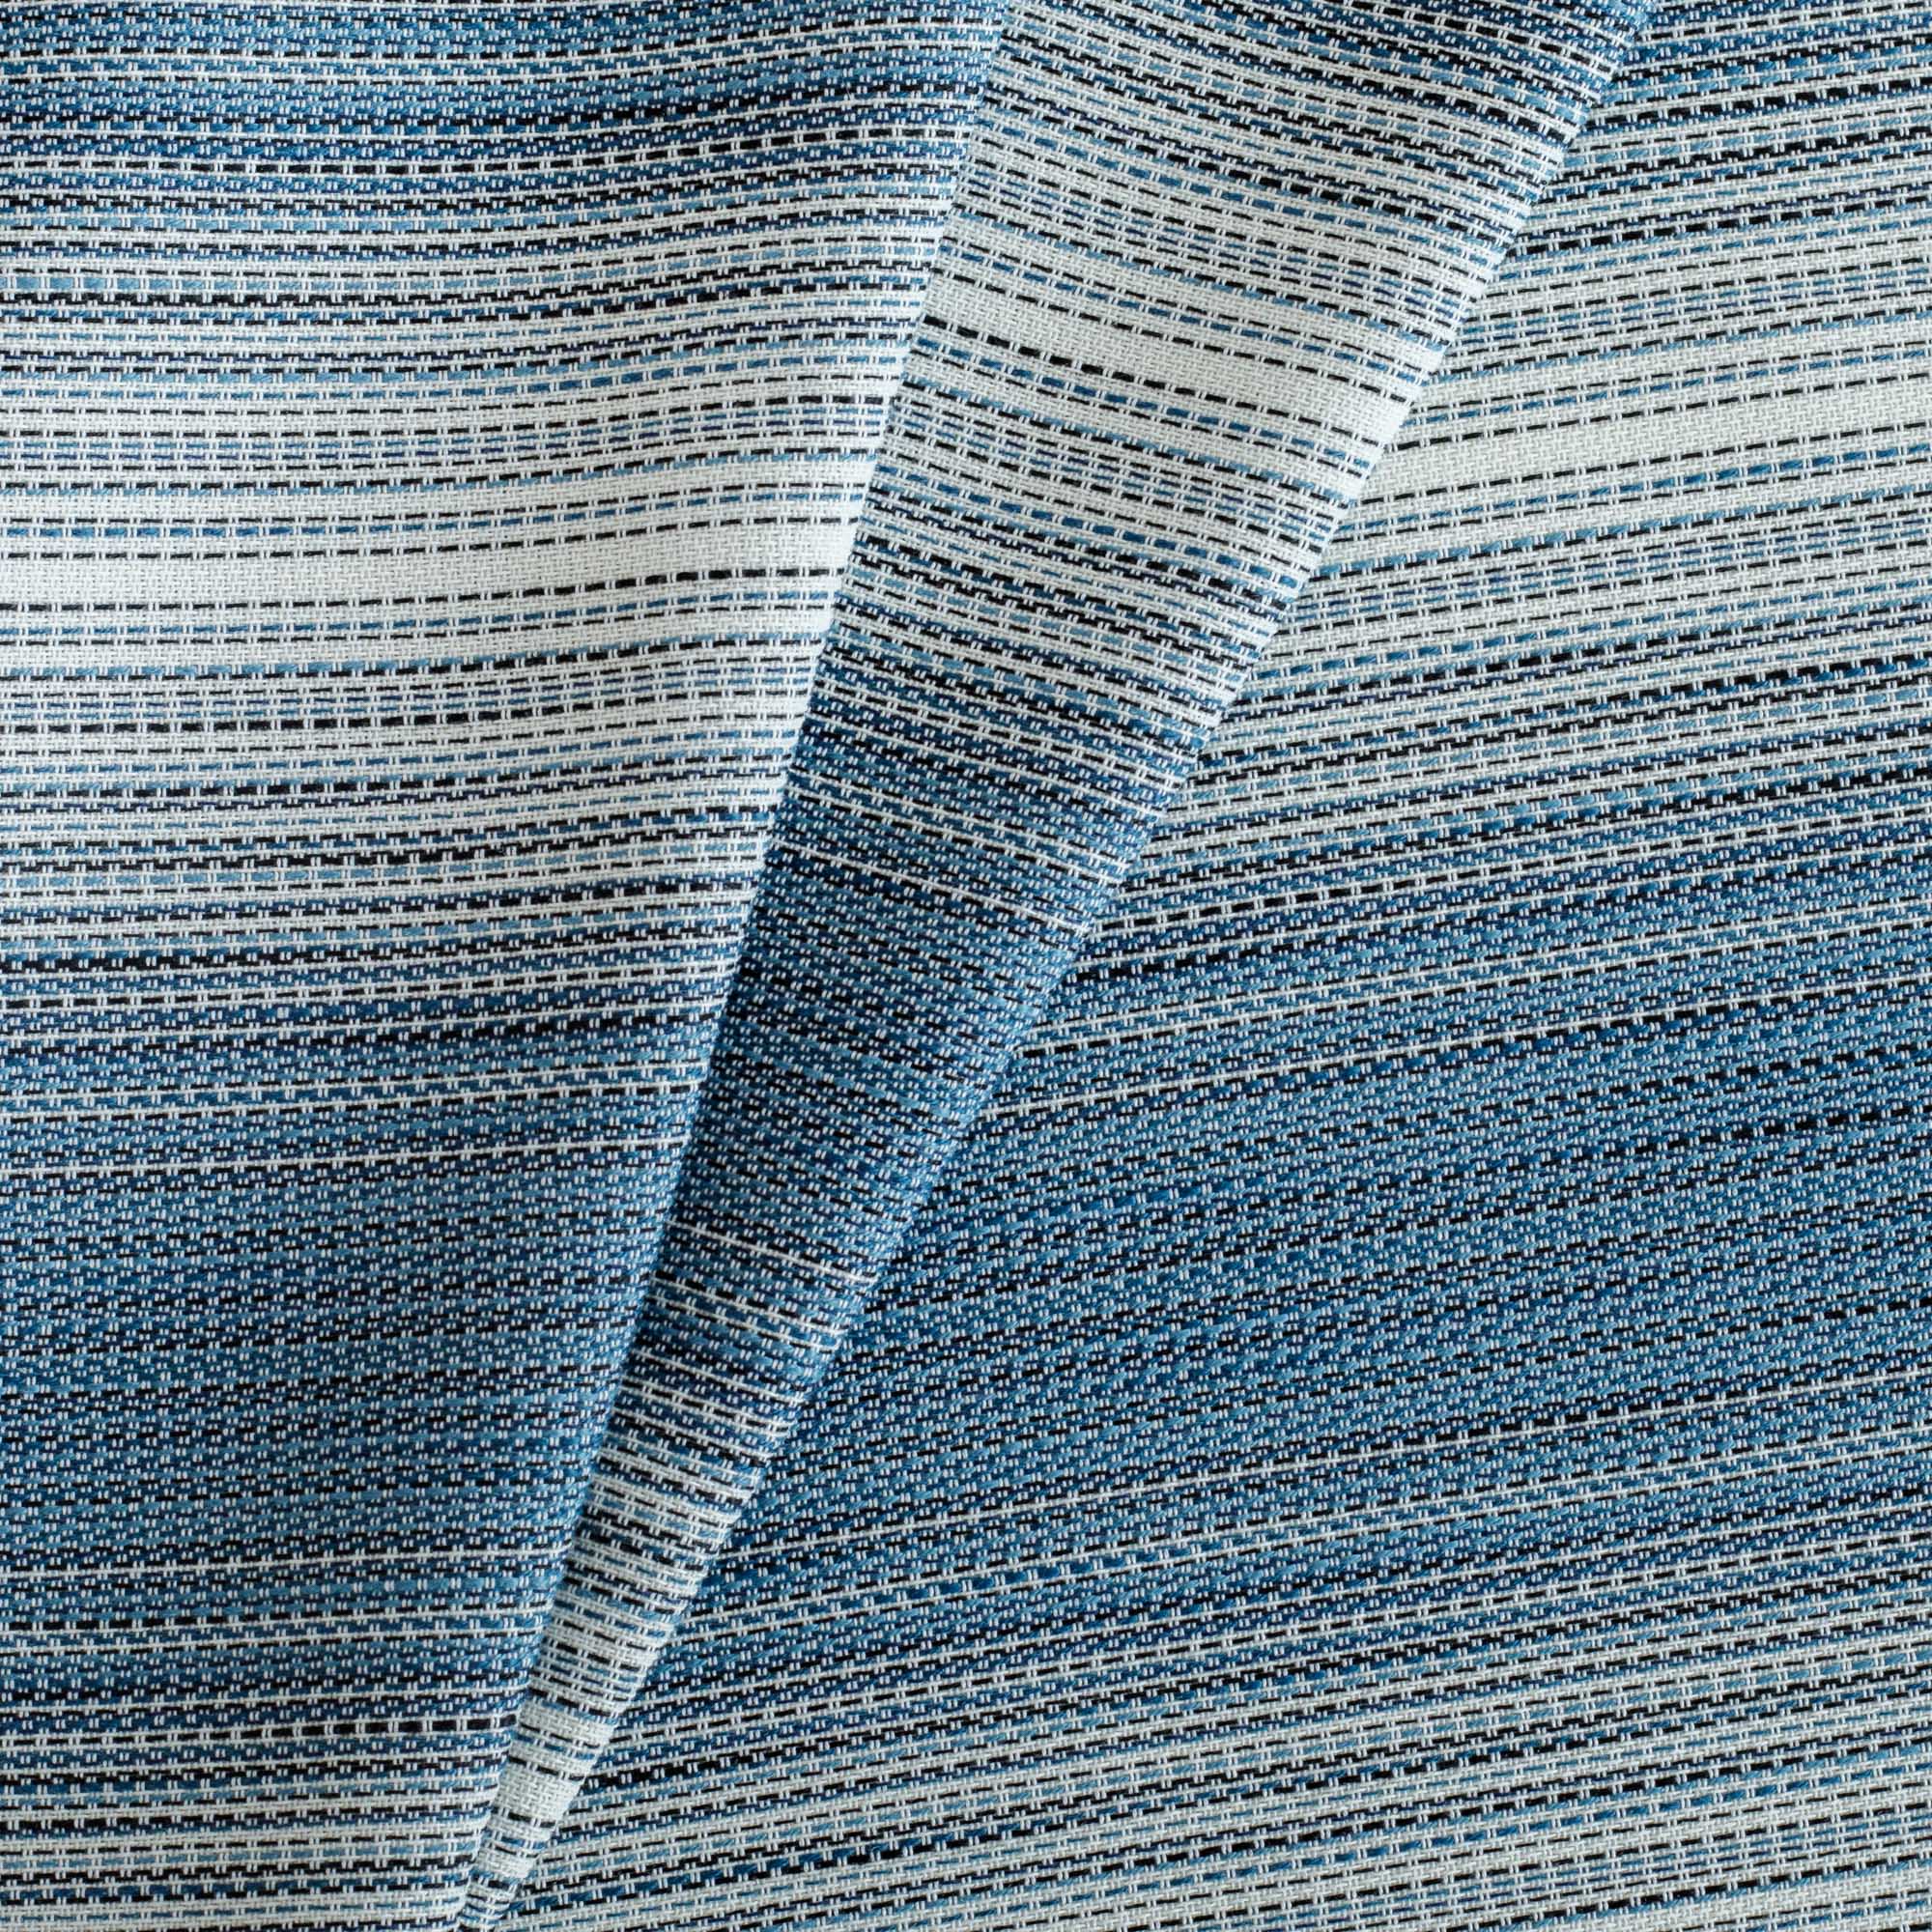 Mateo stripe InsideOut fabric Indigo, a blue and white stripe outdoor performance upholstery fabric from Tonic Living